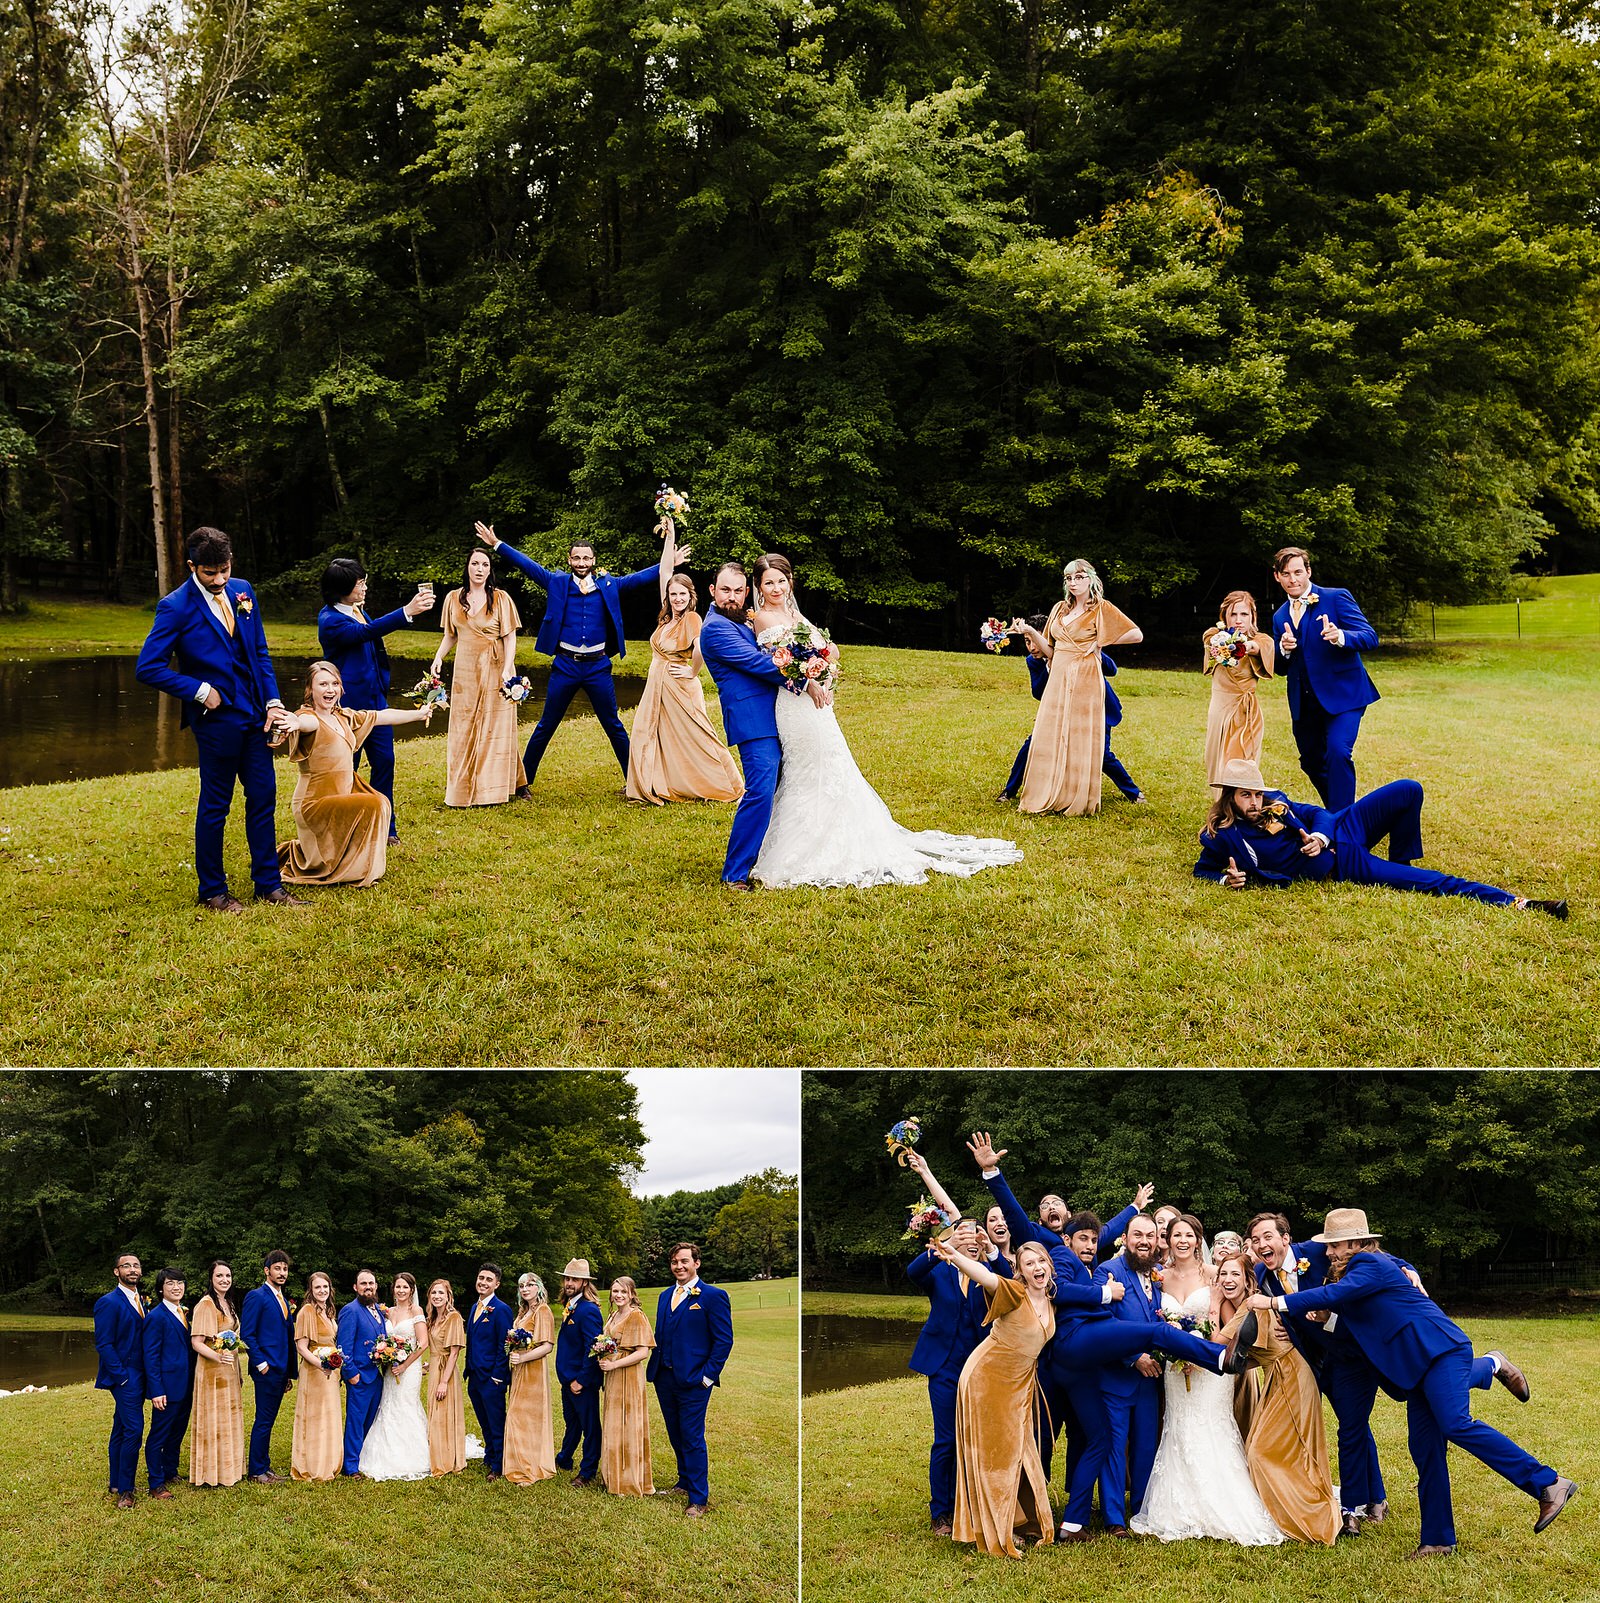 Wedding party style inspiration: yellow velvet bridesmaid dress from Baltic Born and blue suits from Generation Tux